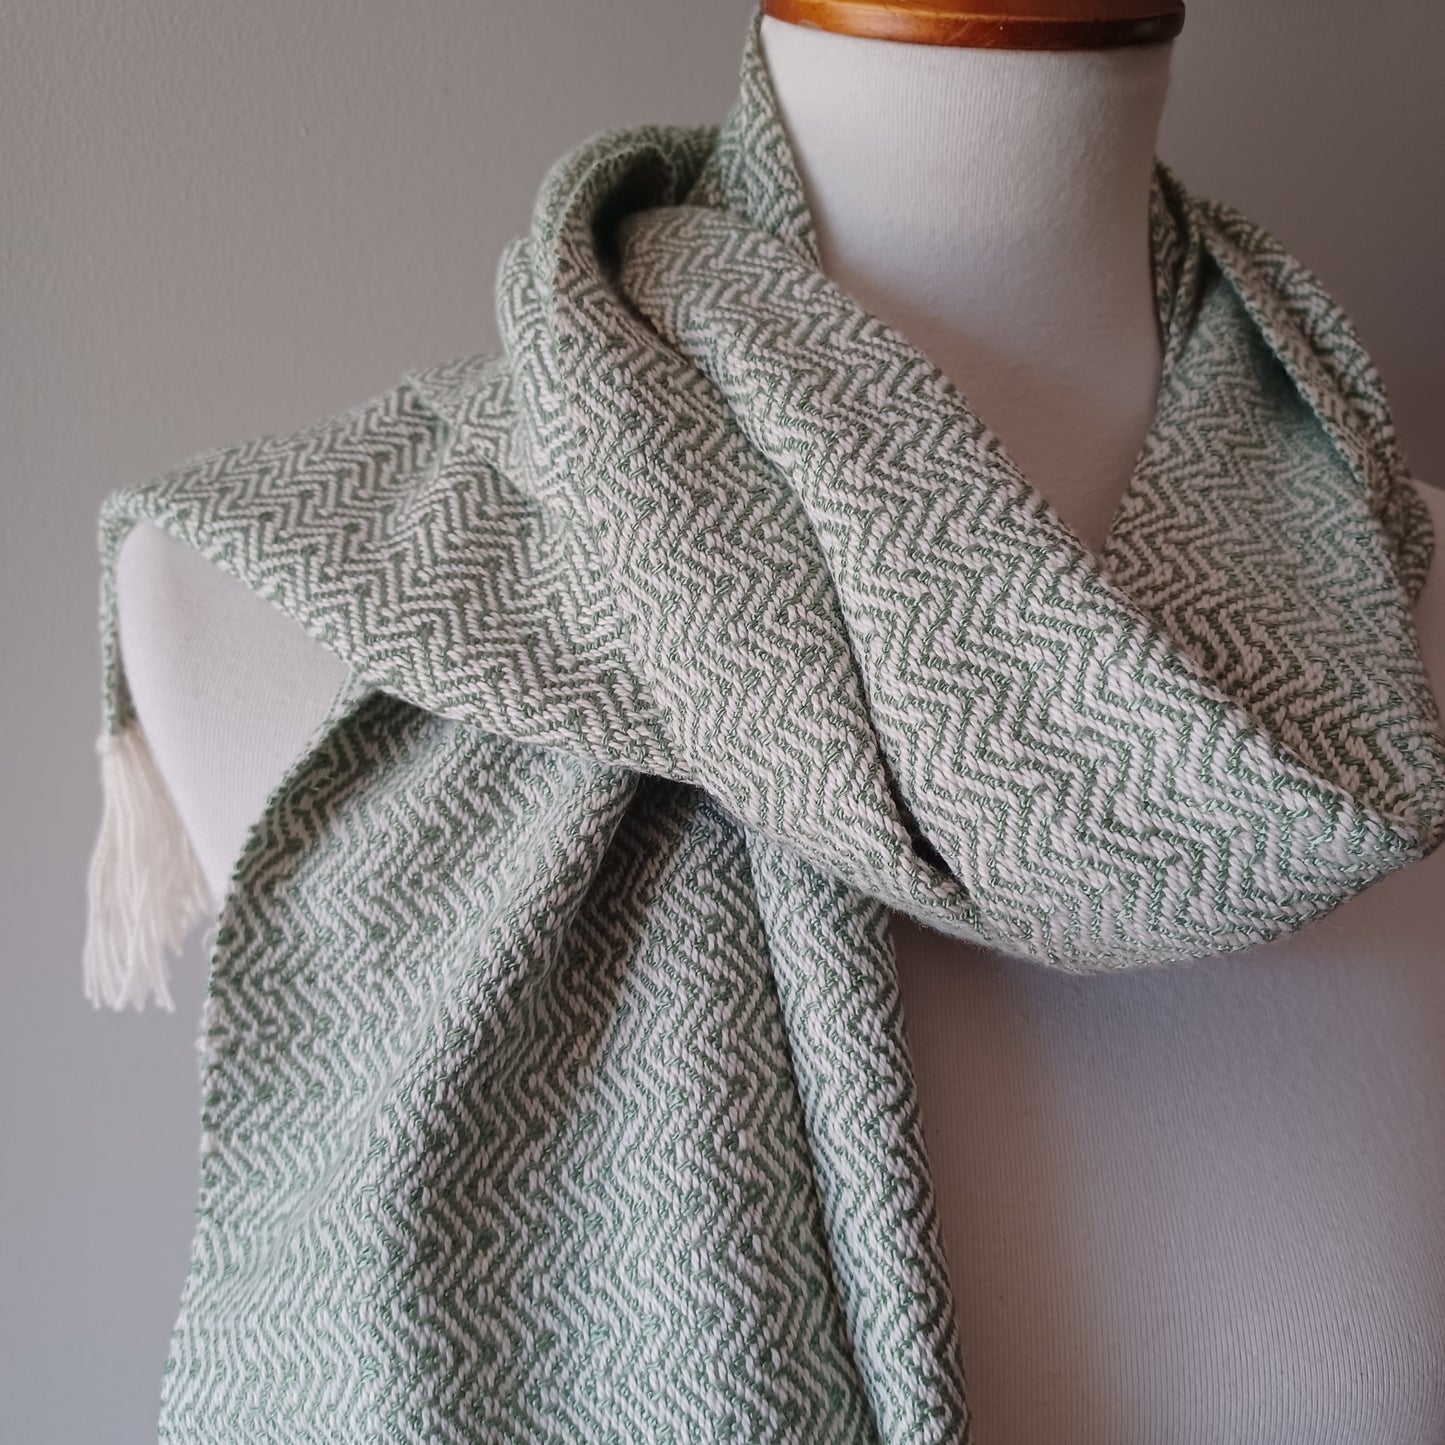 Handwoven Cotton-Bamboo Scarf - Sage